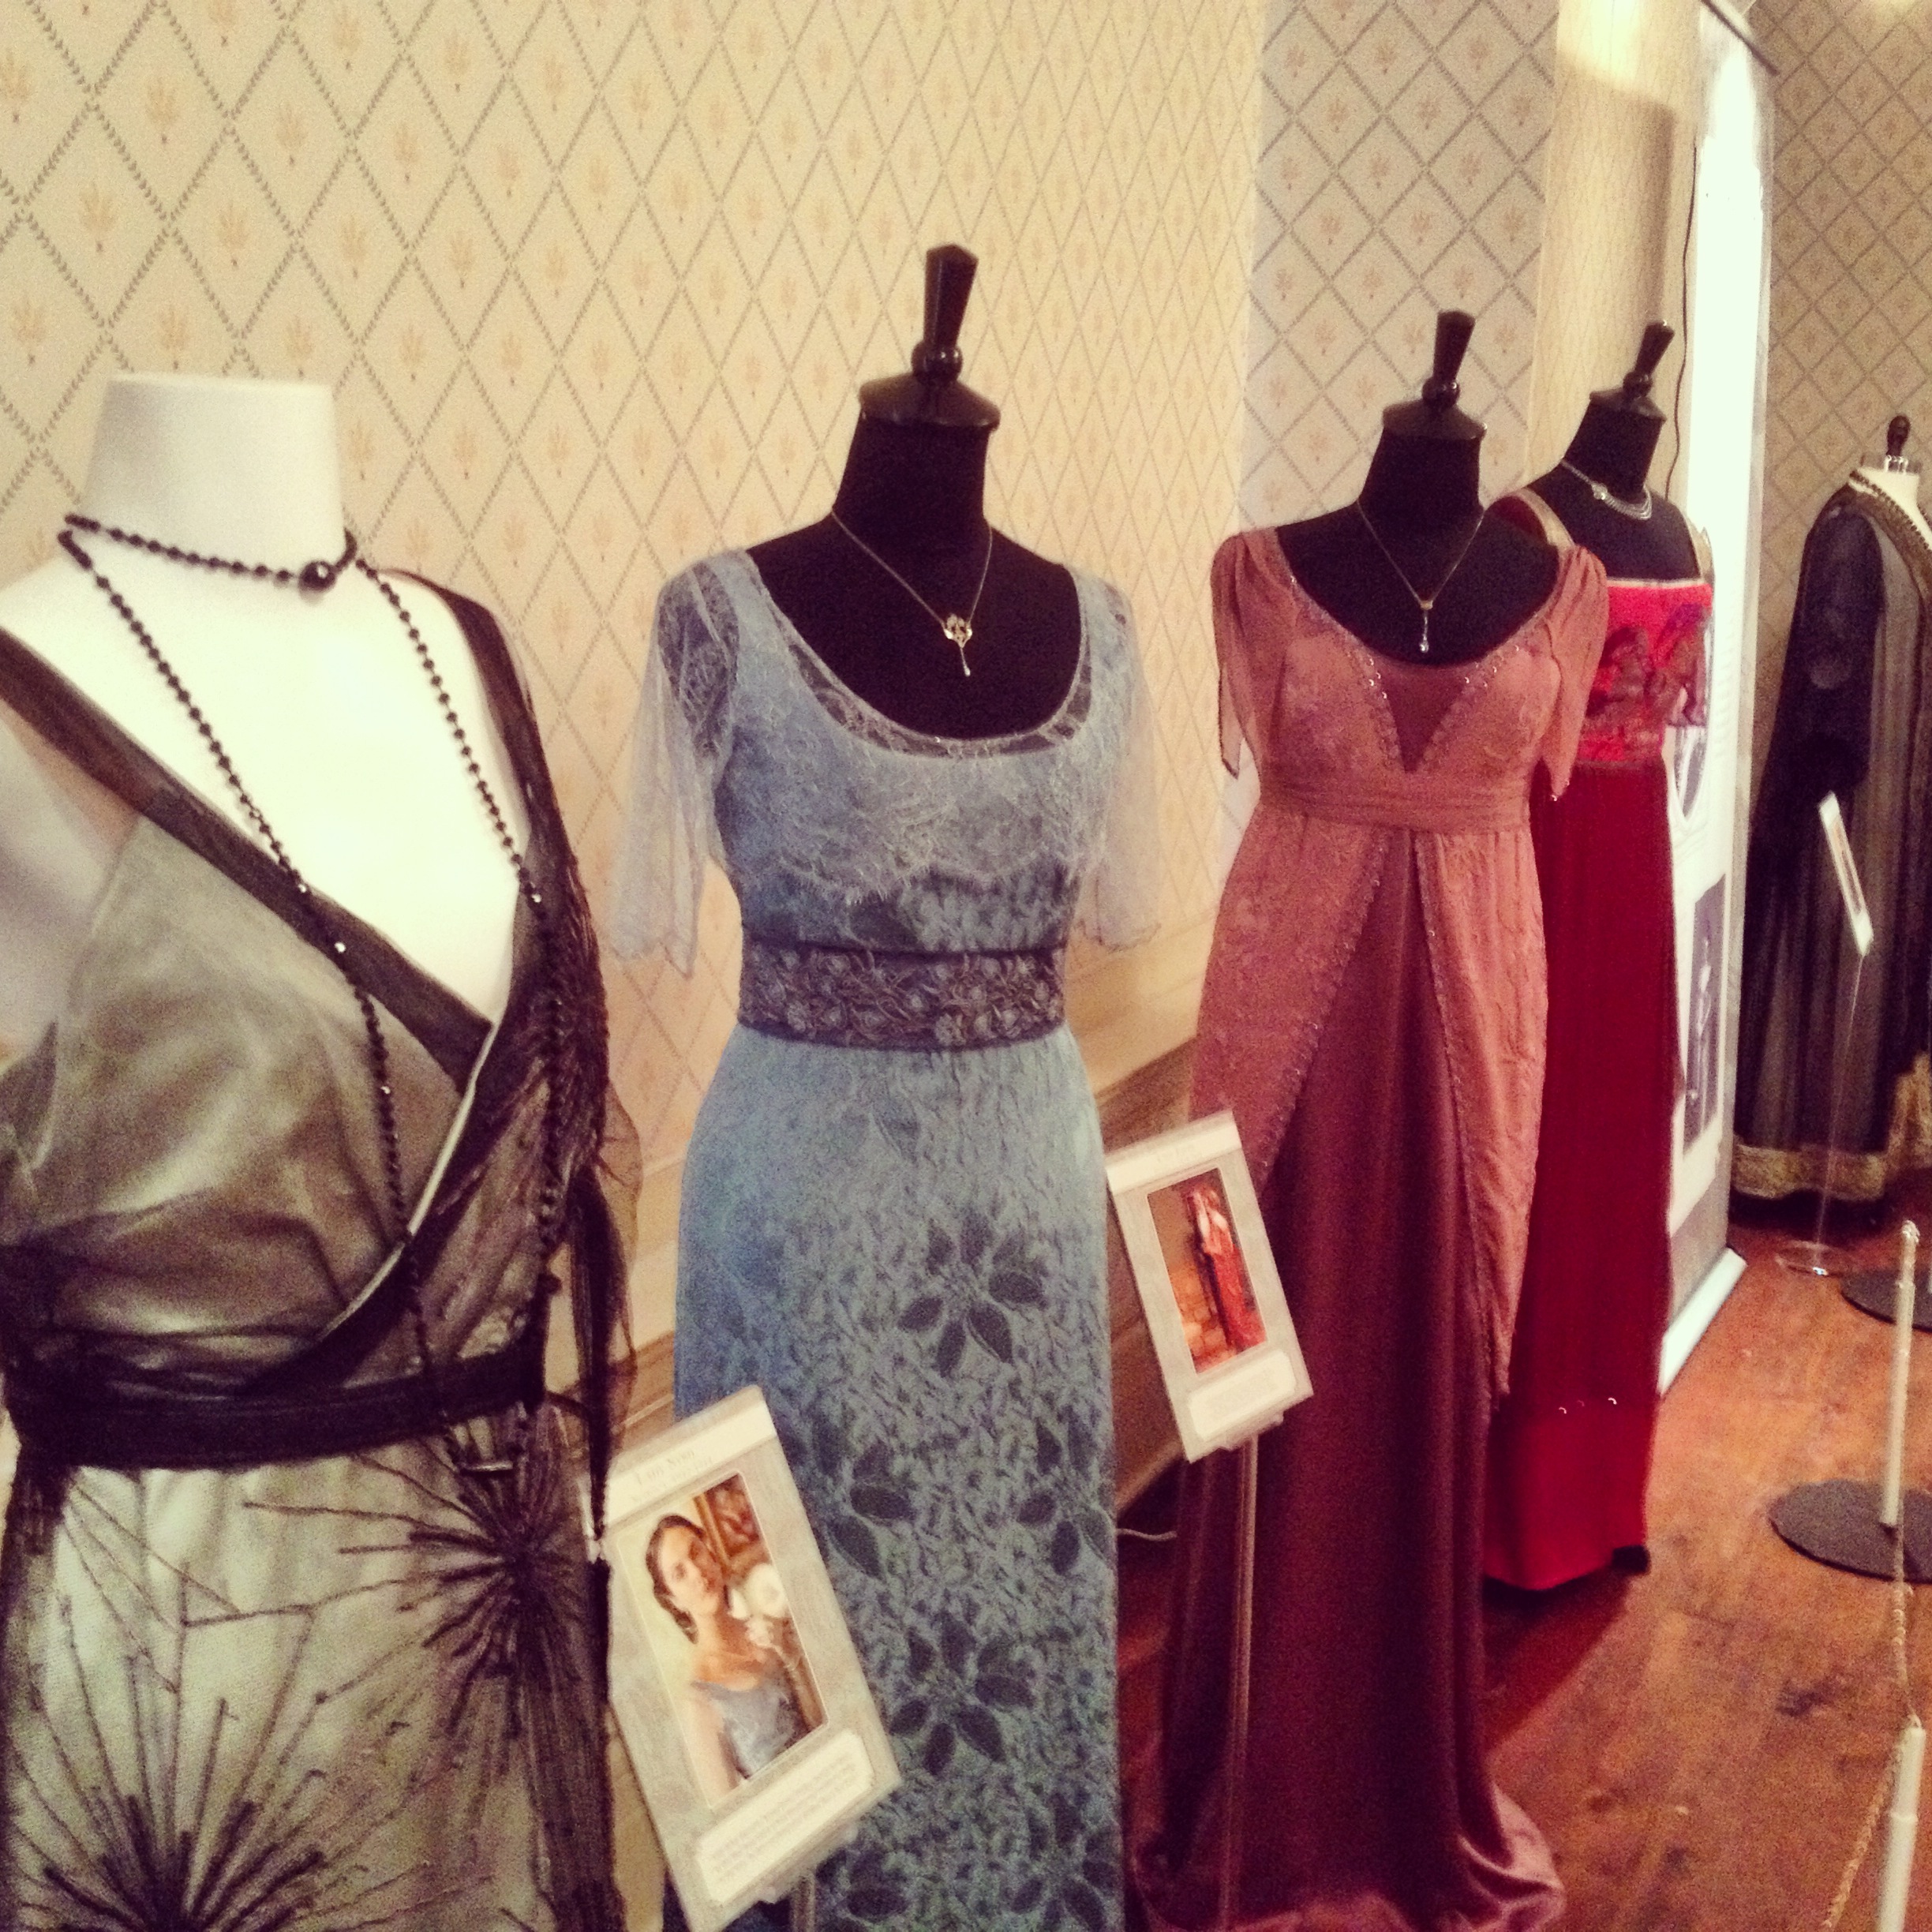 Dressing for Downton at Spadina Museum